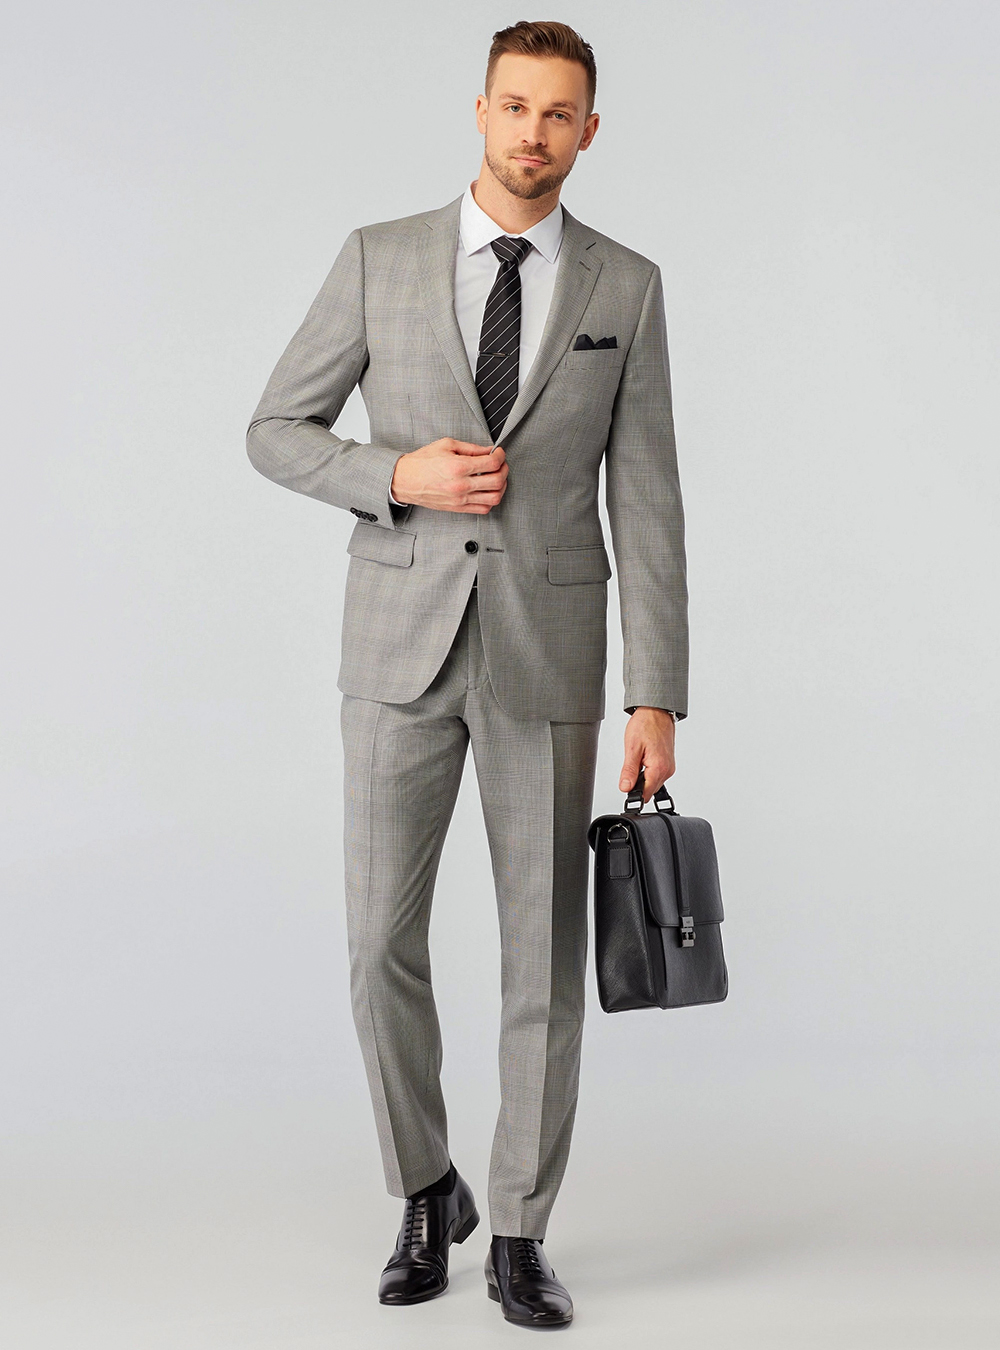 Grey suit, white dress shirt, black tie and black oxford shoes